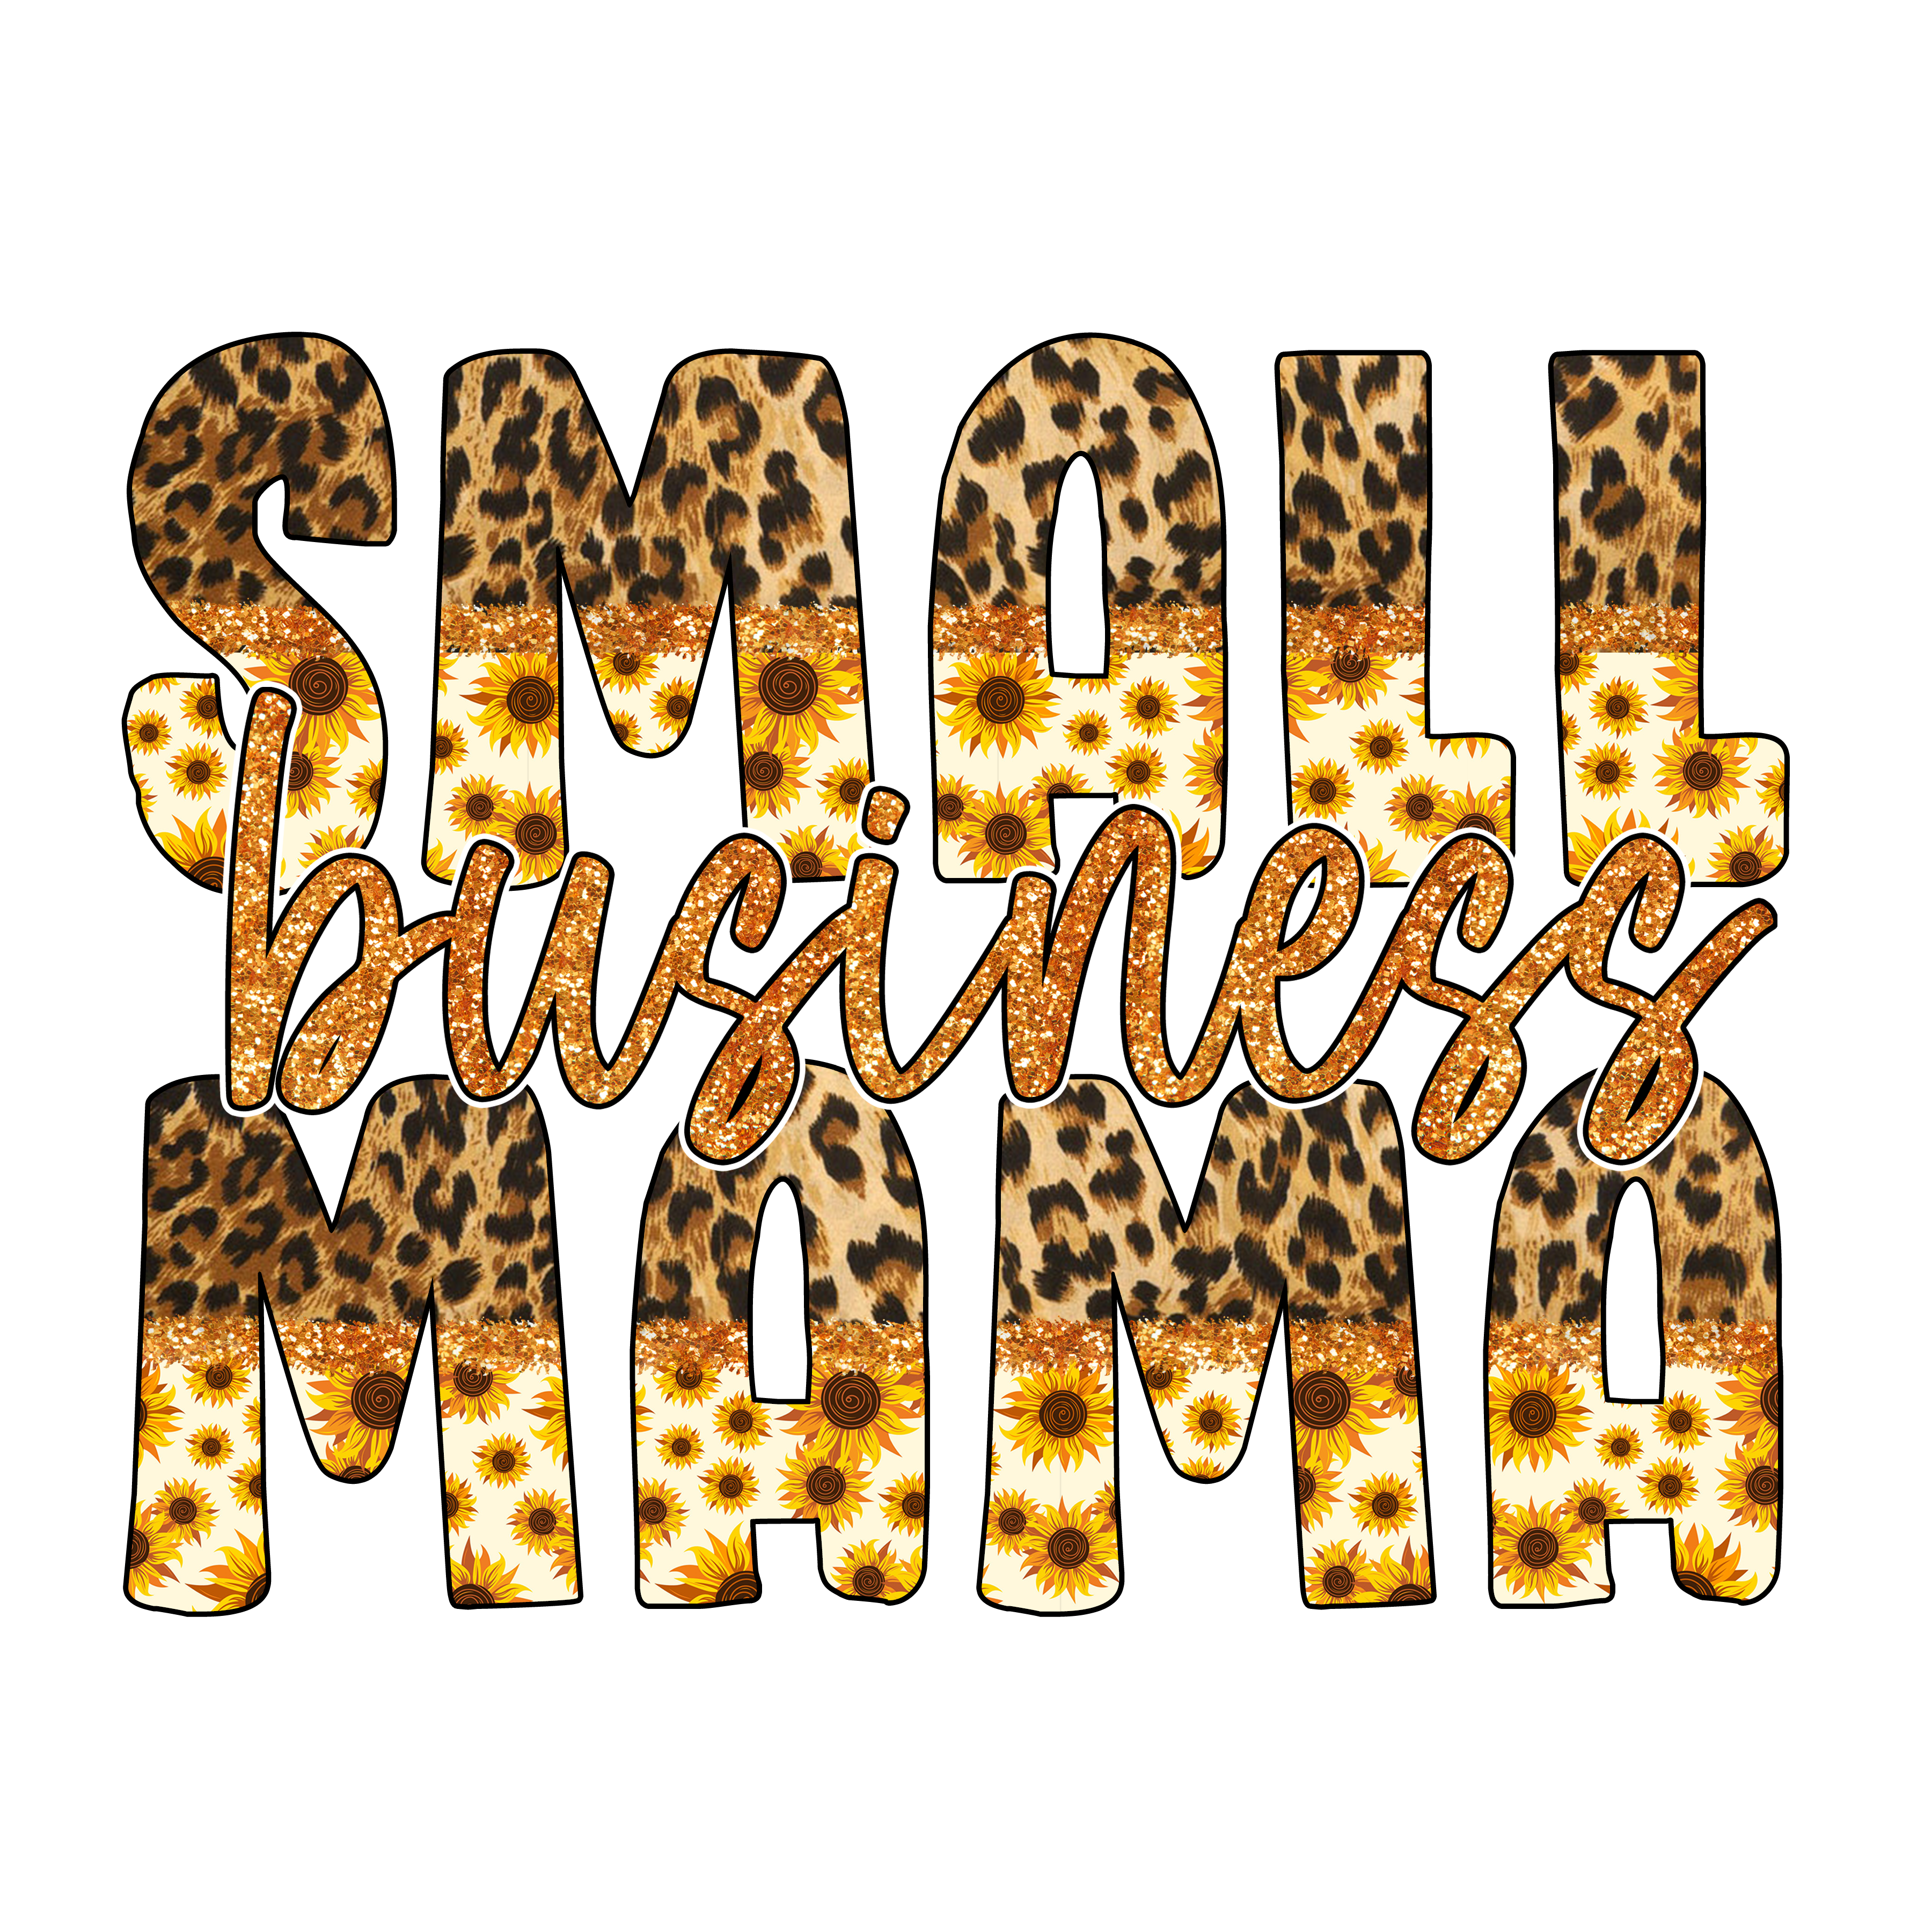 Sublimation Prints - Small Business Mama - The Vinyl Haus